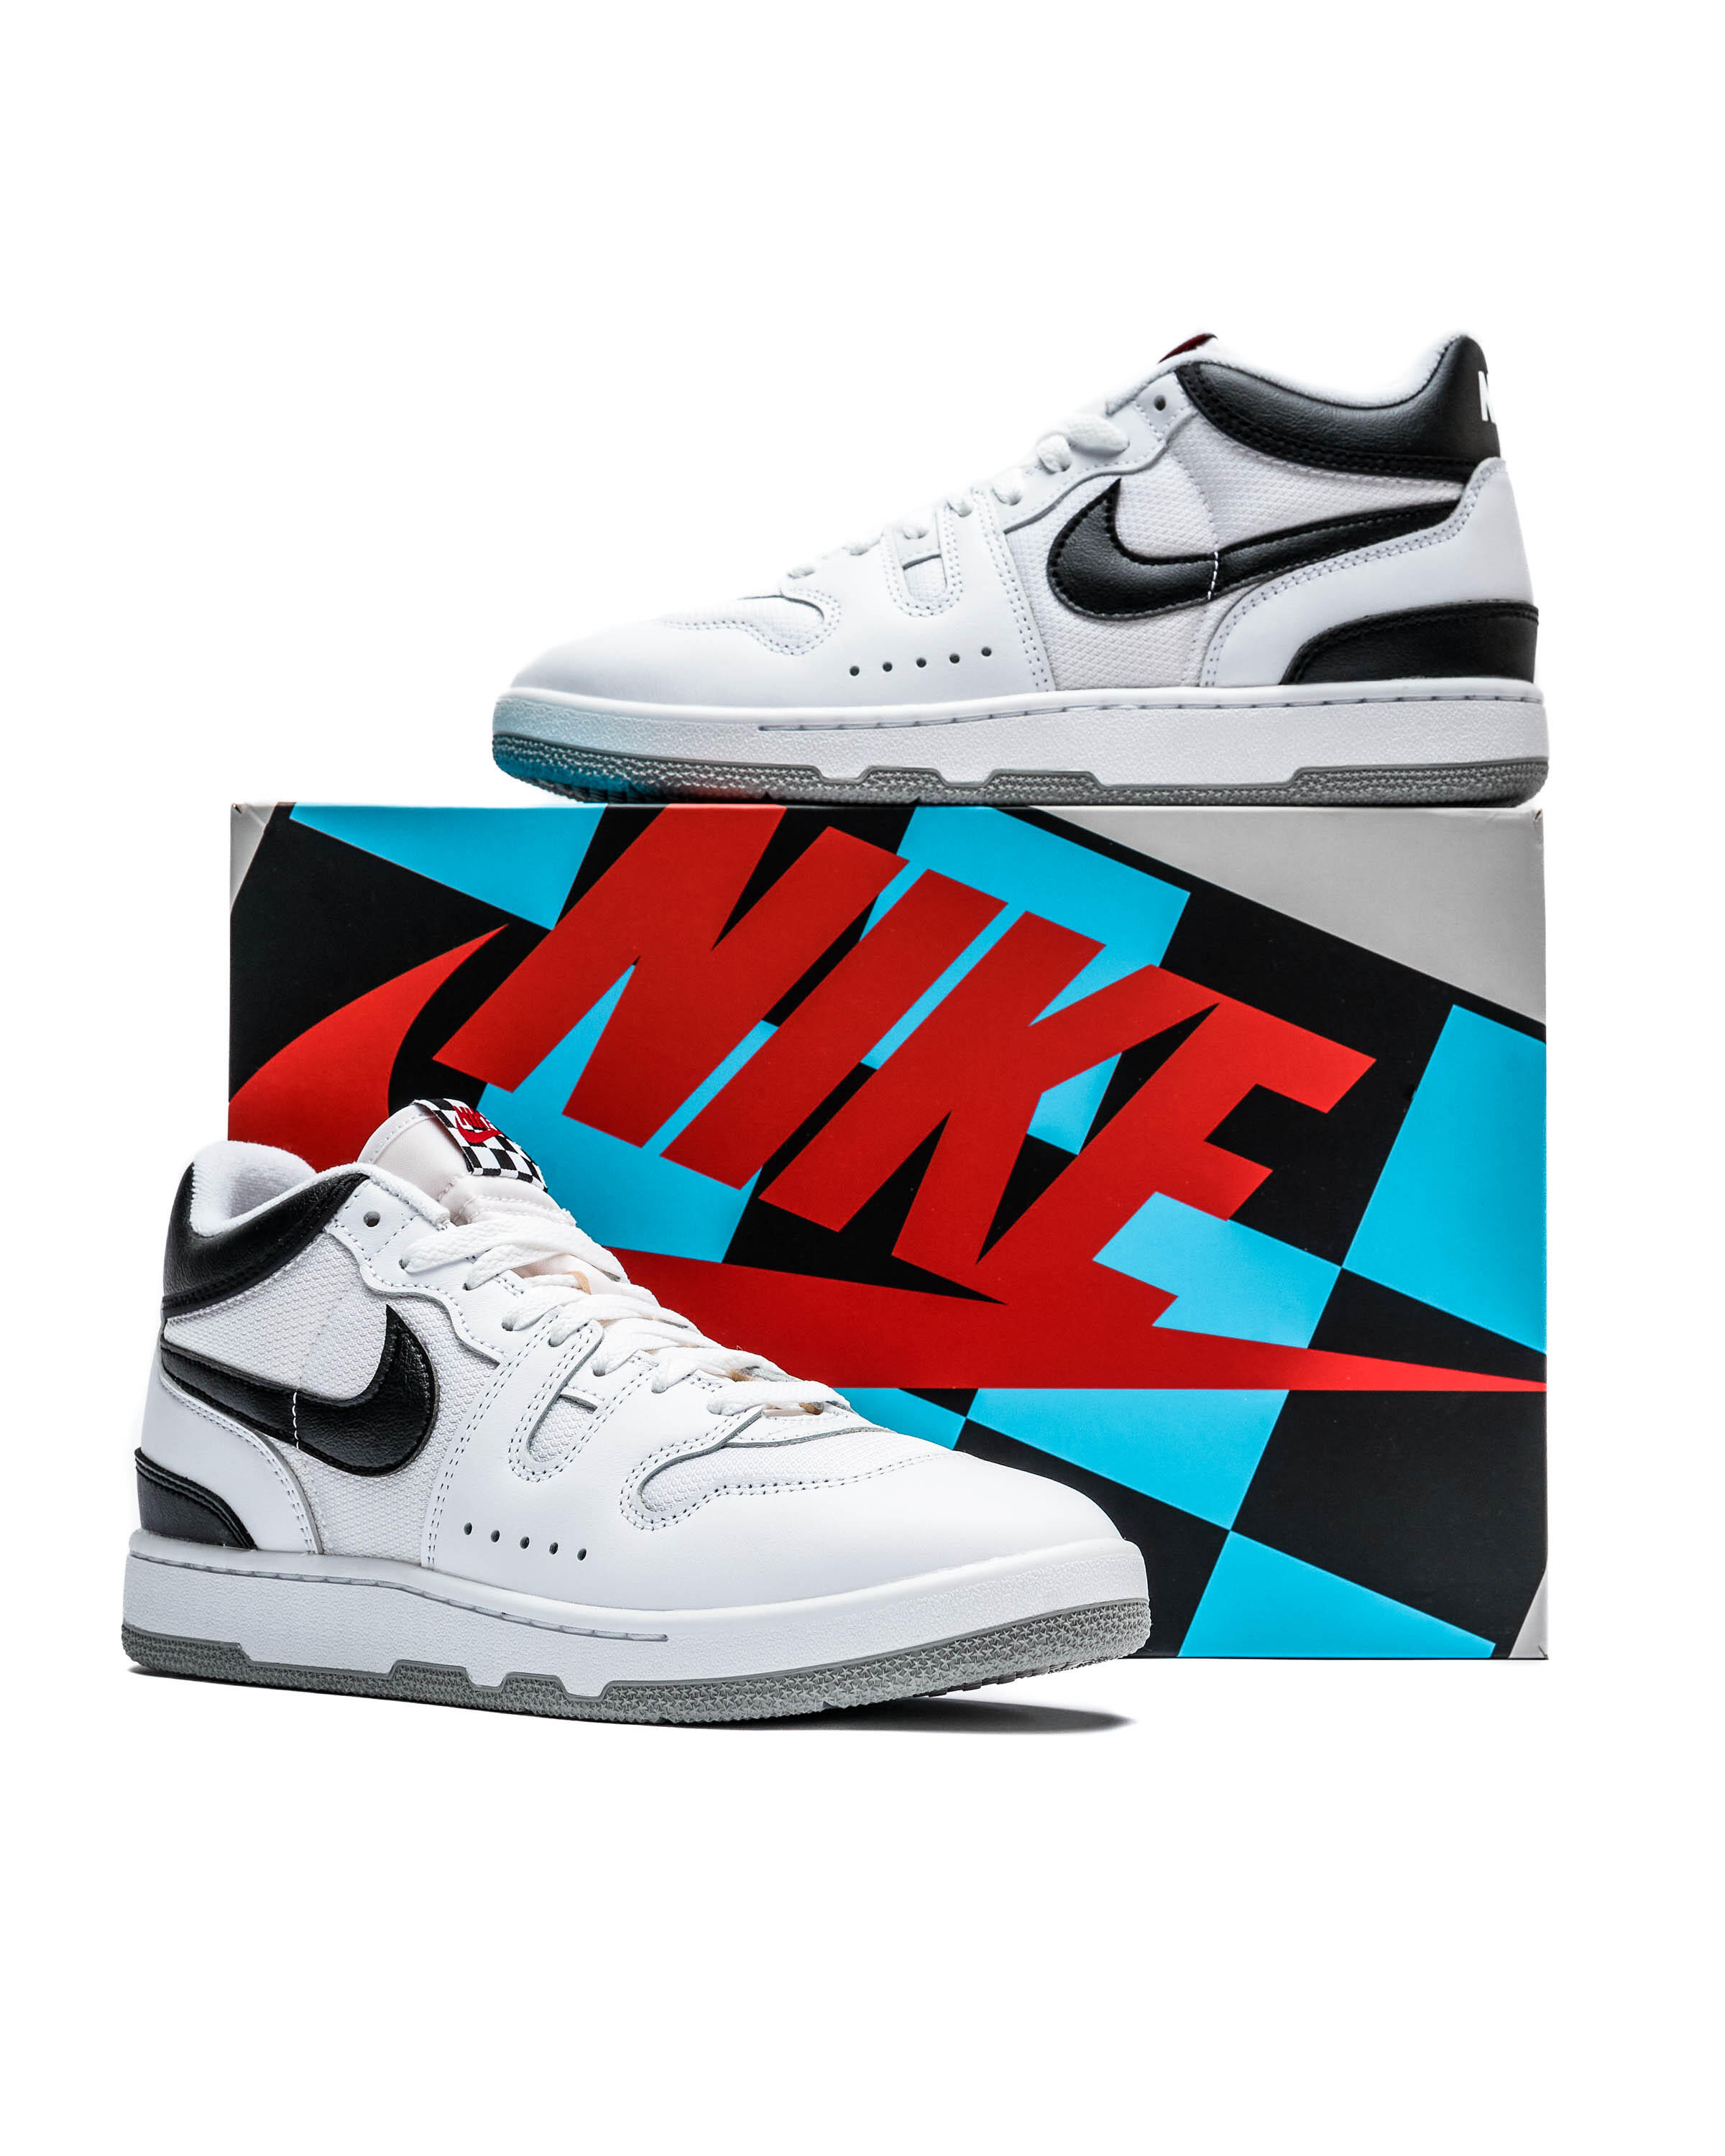 NEW新品NIKE ATTACK QS SP 25.5 靴